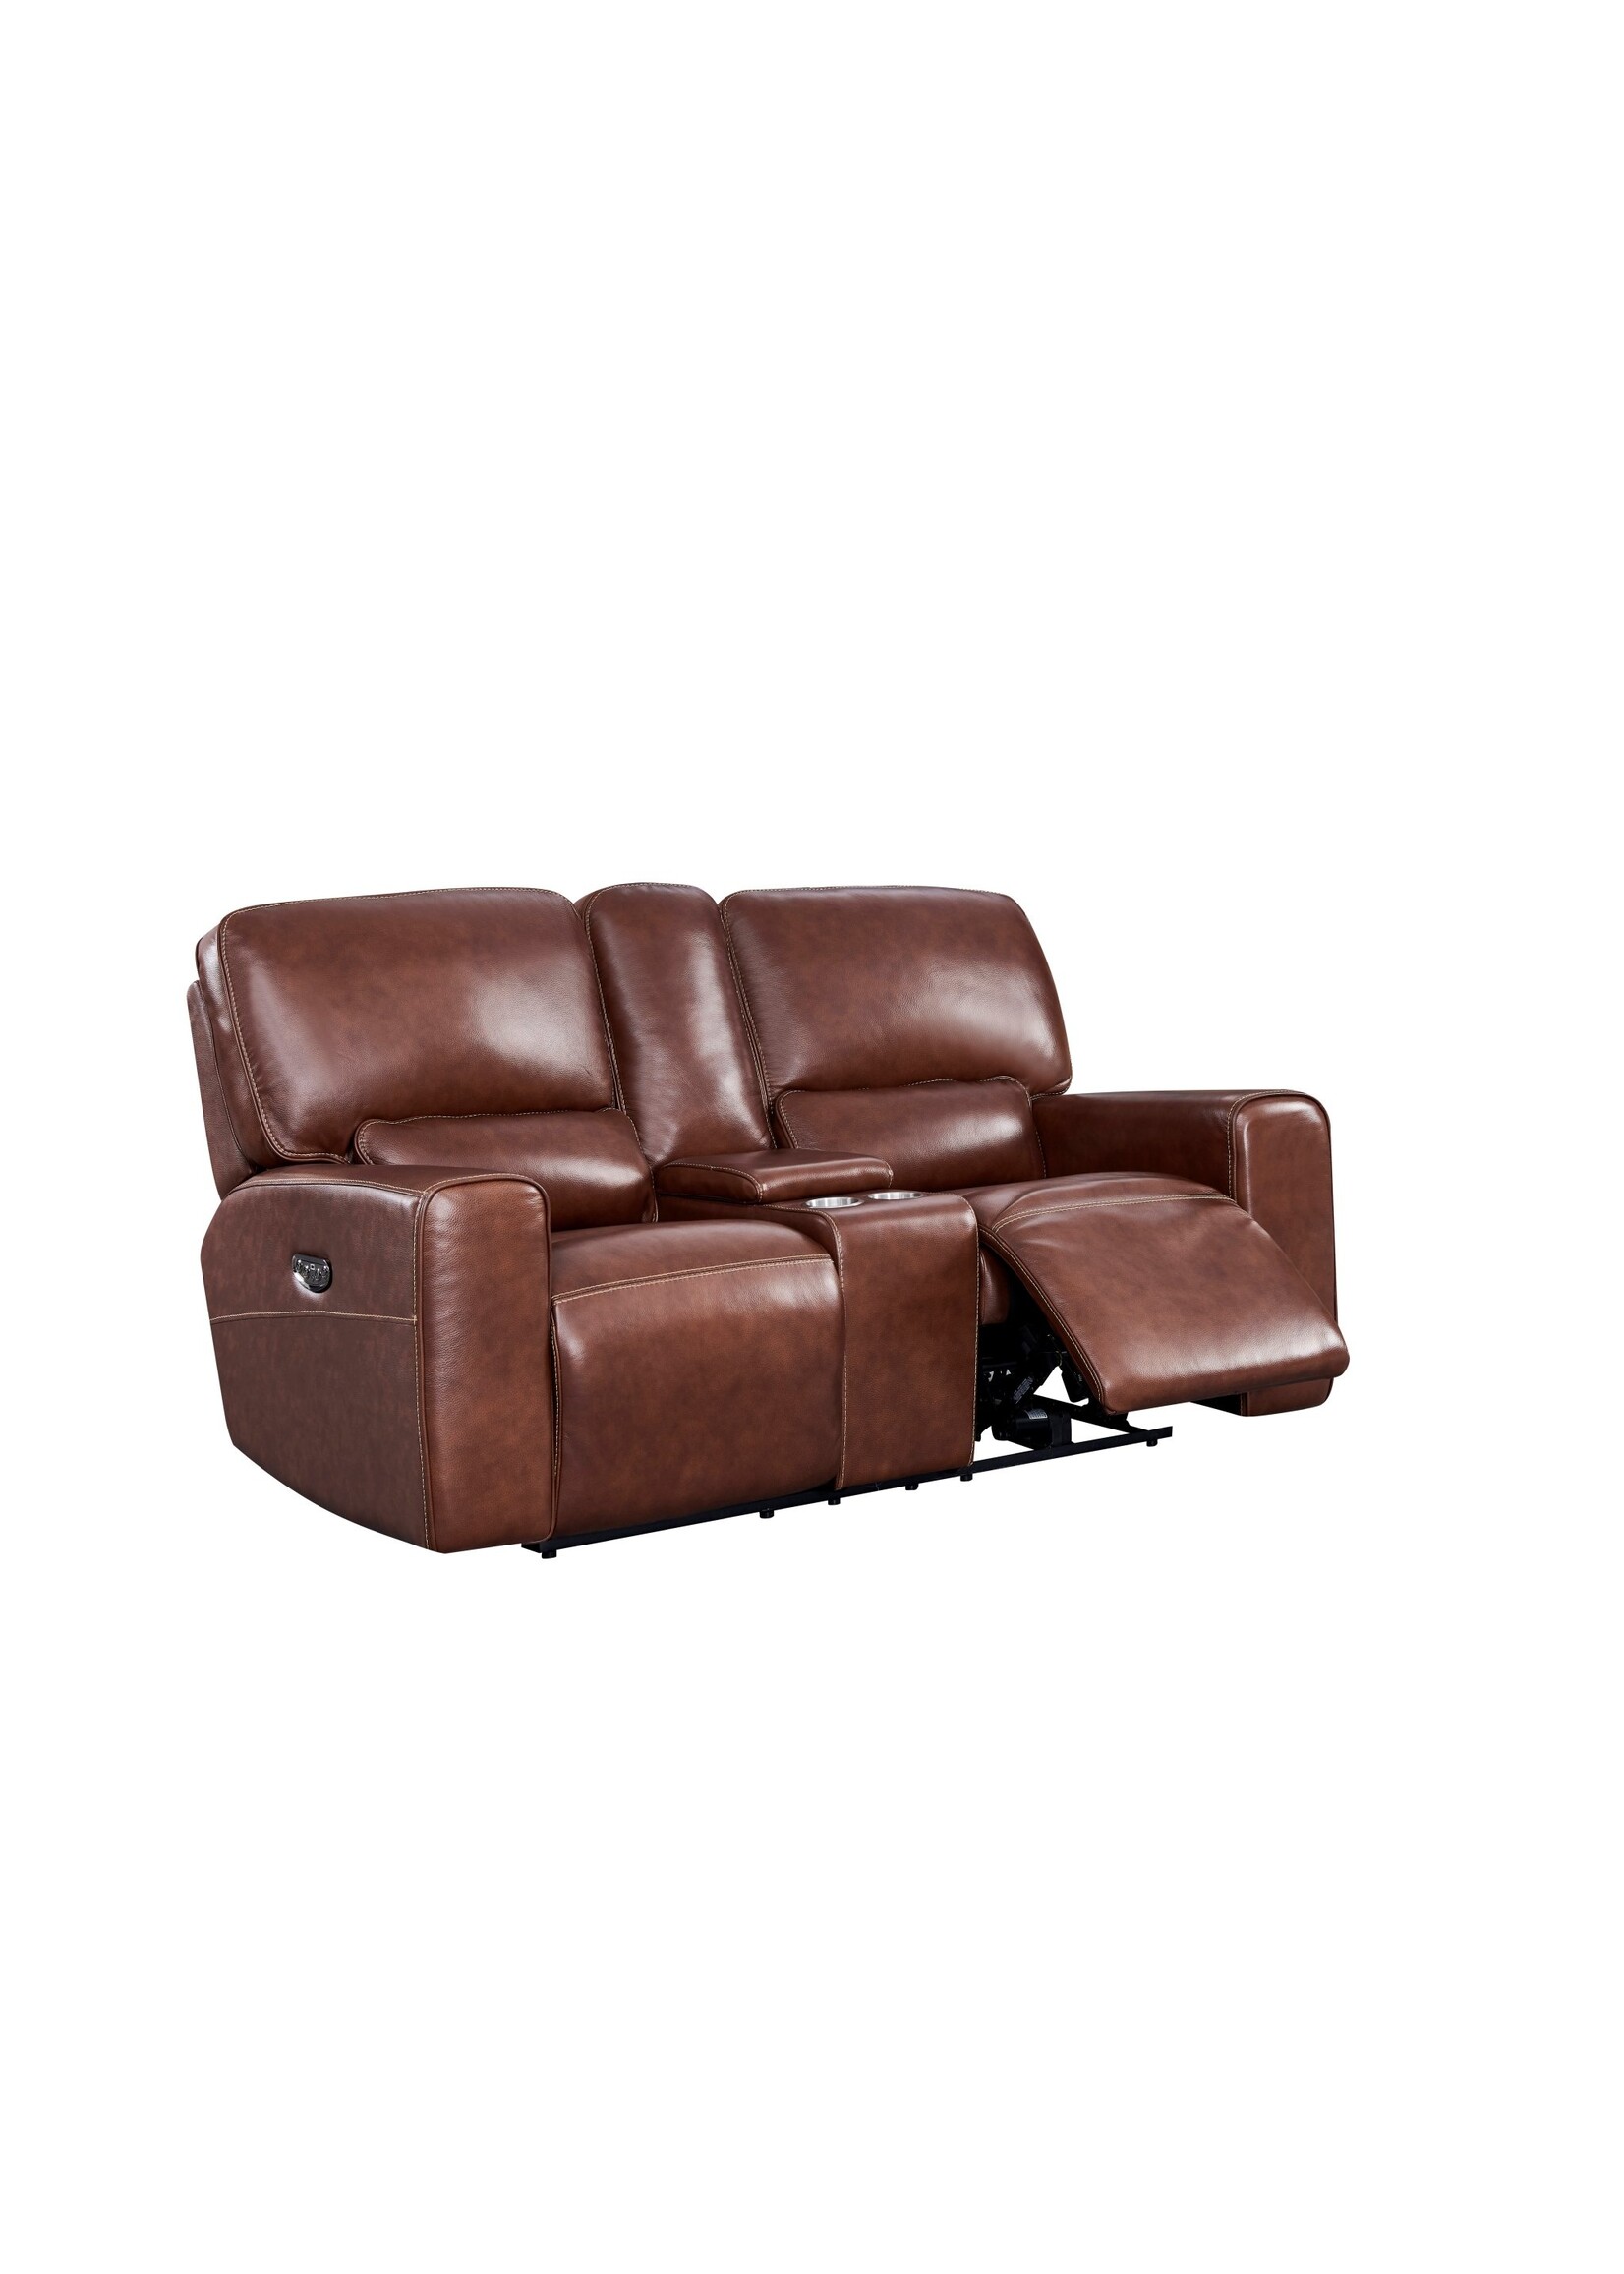 BROADWAY EH9049 P2 CONSOLE LOVESEAT 8540LV BROWN